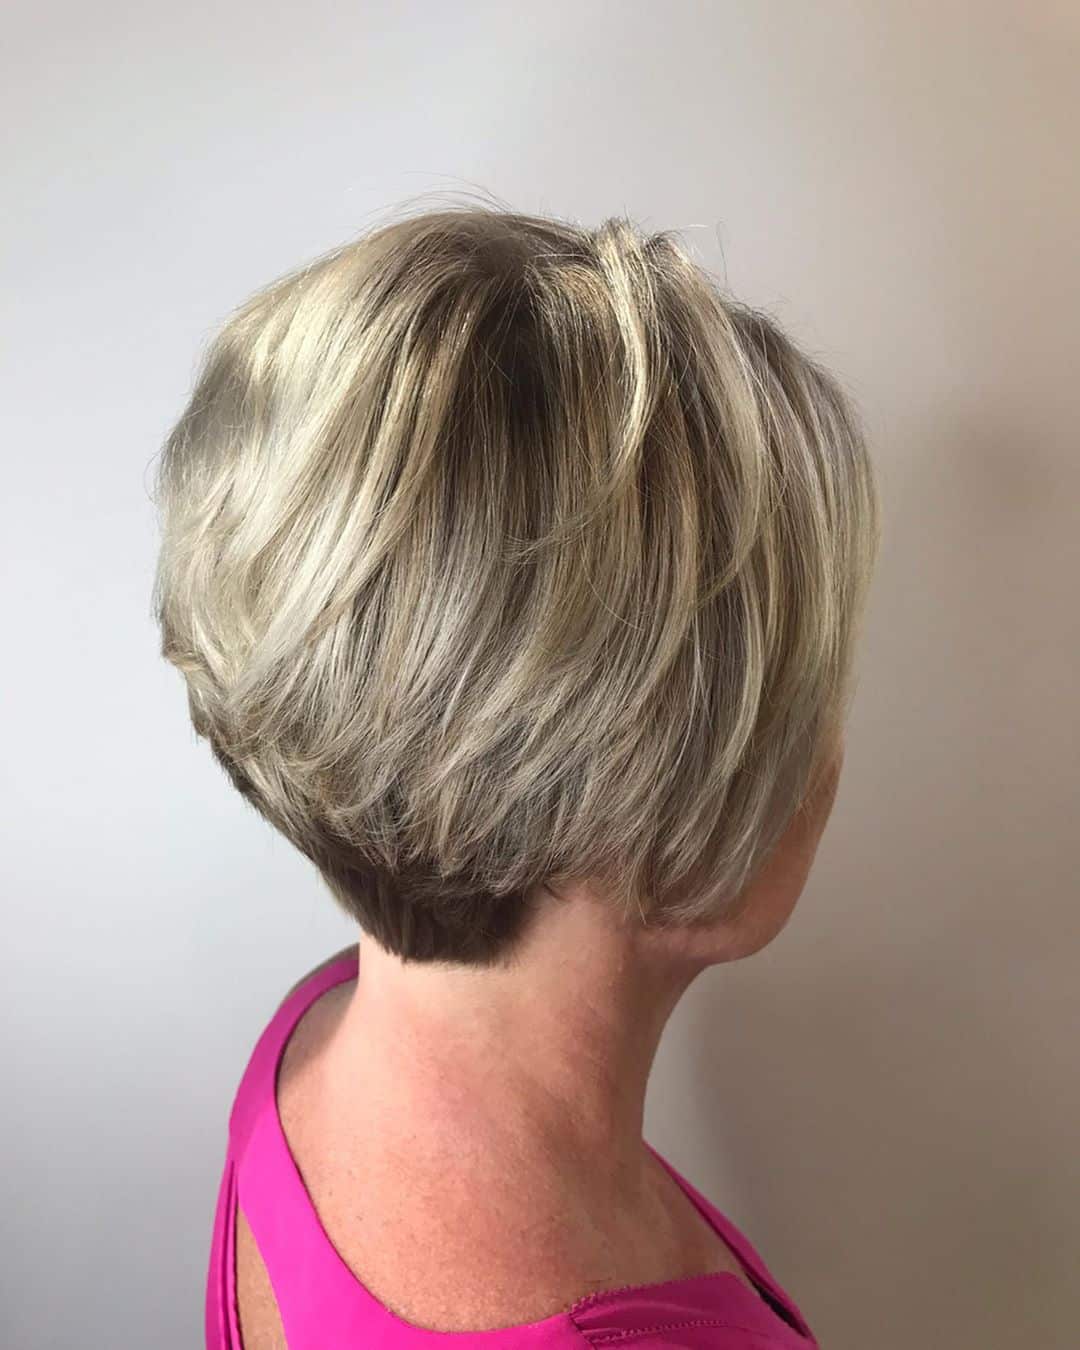 Short Stacked Pixie Haircut